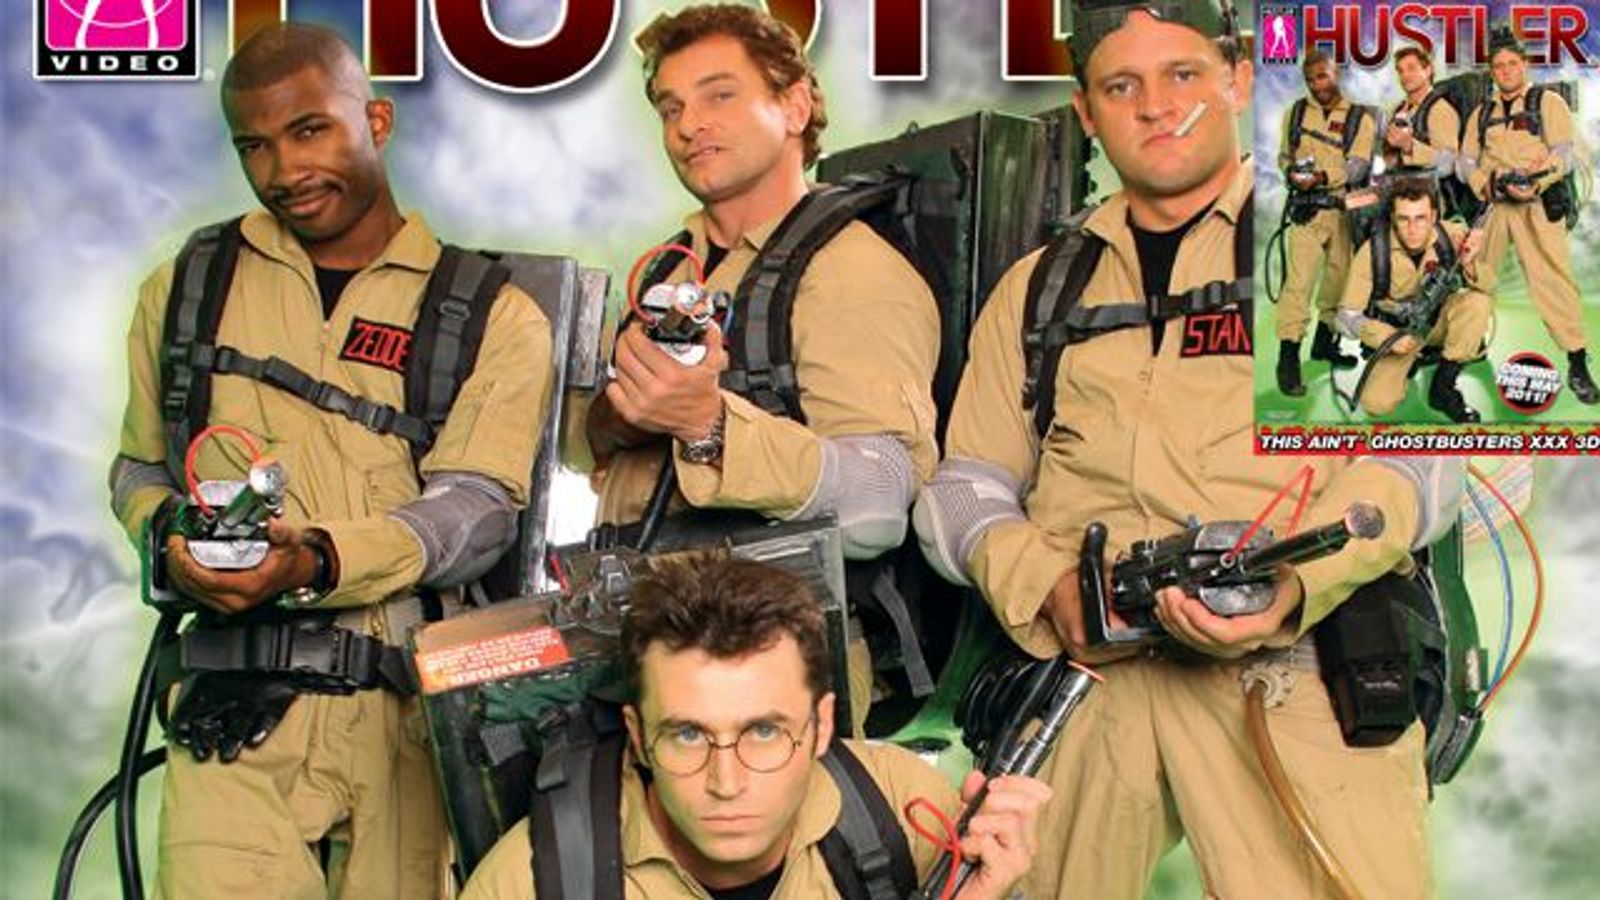 'This Ain't Ghostbusters XXX' Parody Receives Rave Reviews